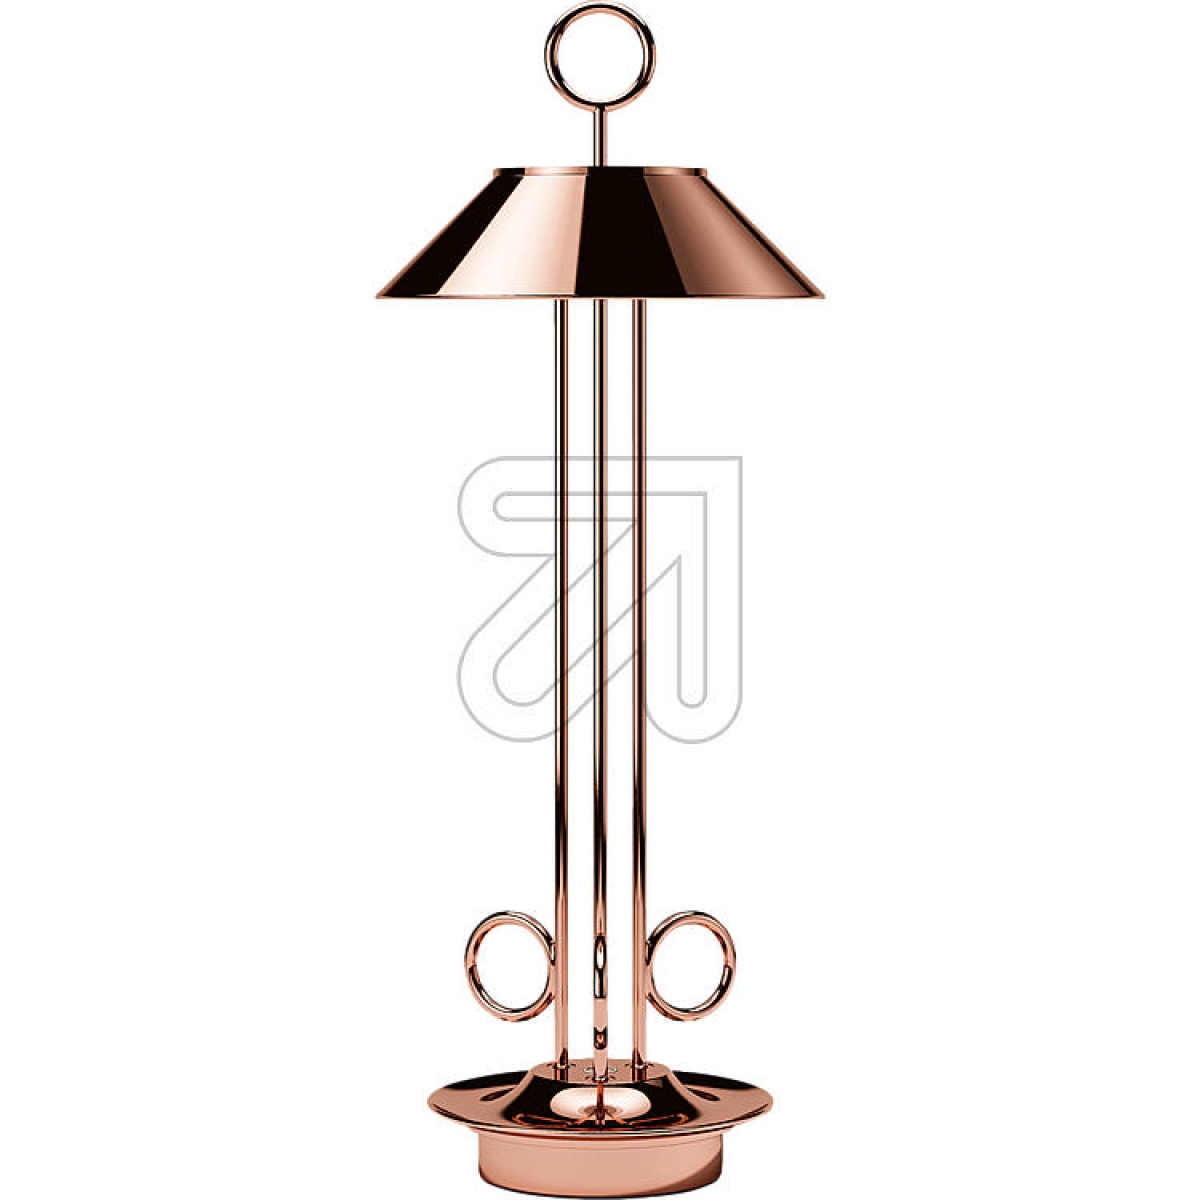 SIGORLED battery-powered table lamp Nudiderot copper 4701101Article-No: 644095